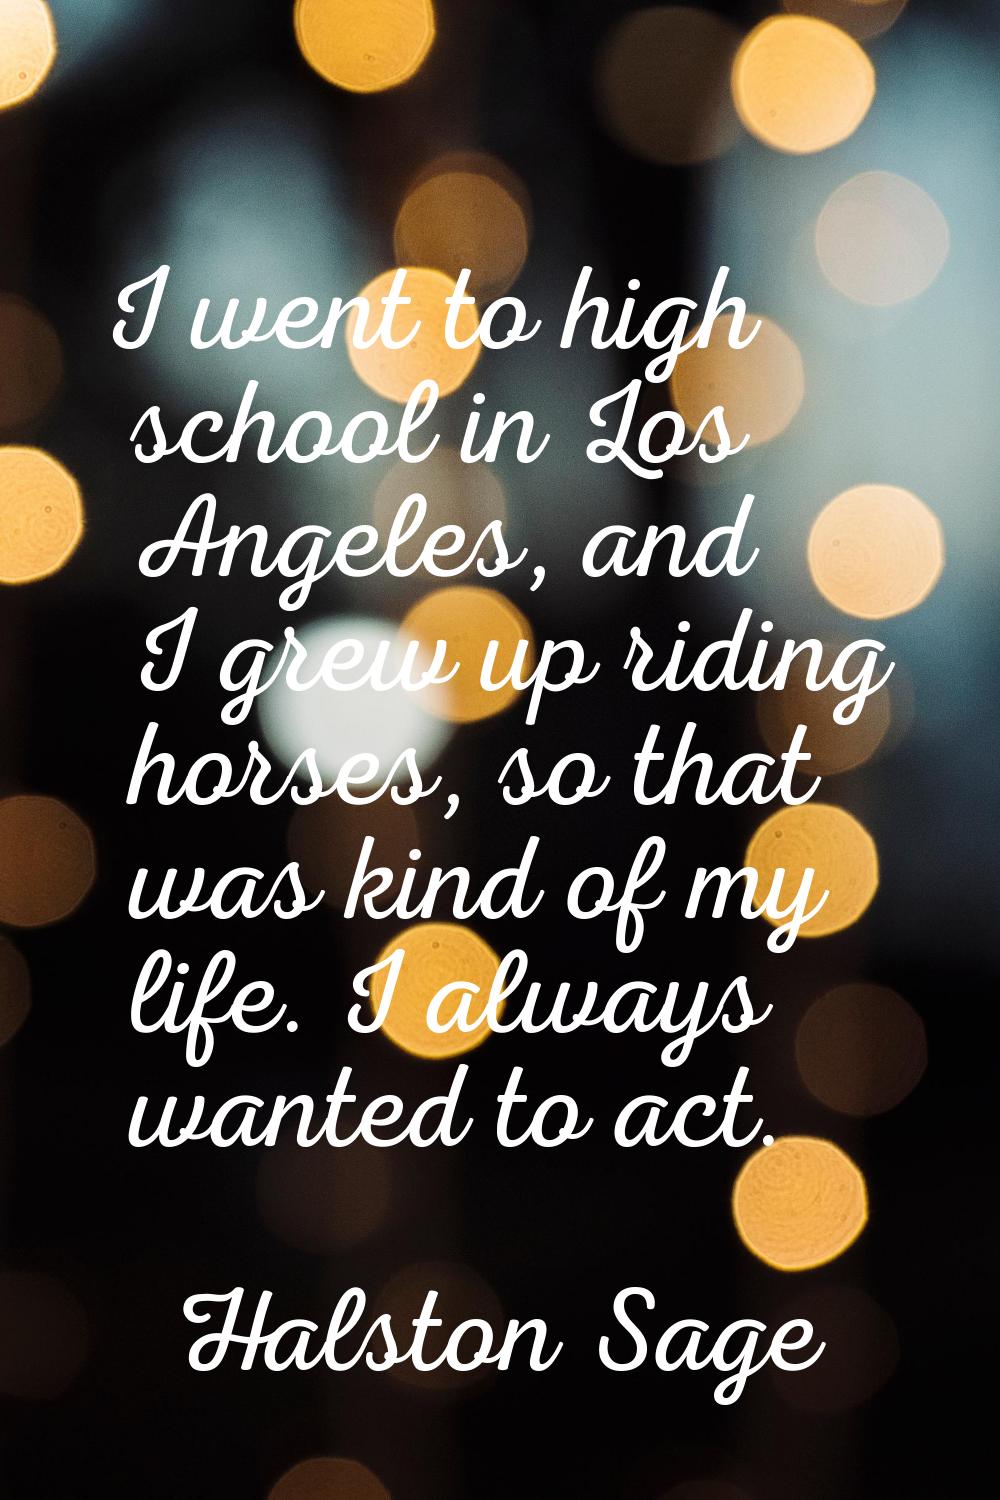 I went to high school in Los Angeles, and I grew up riding horses, so that was kind of my life. I a